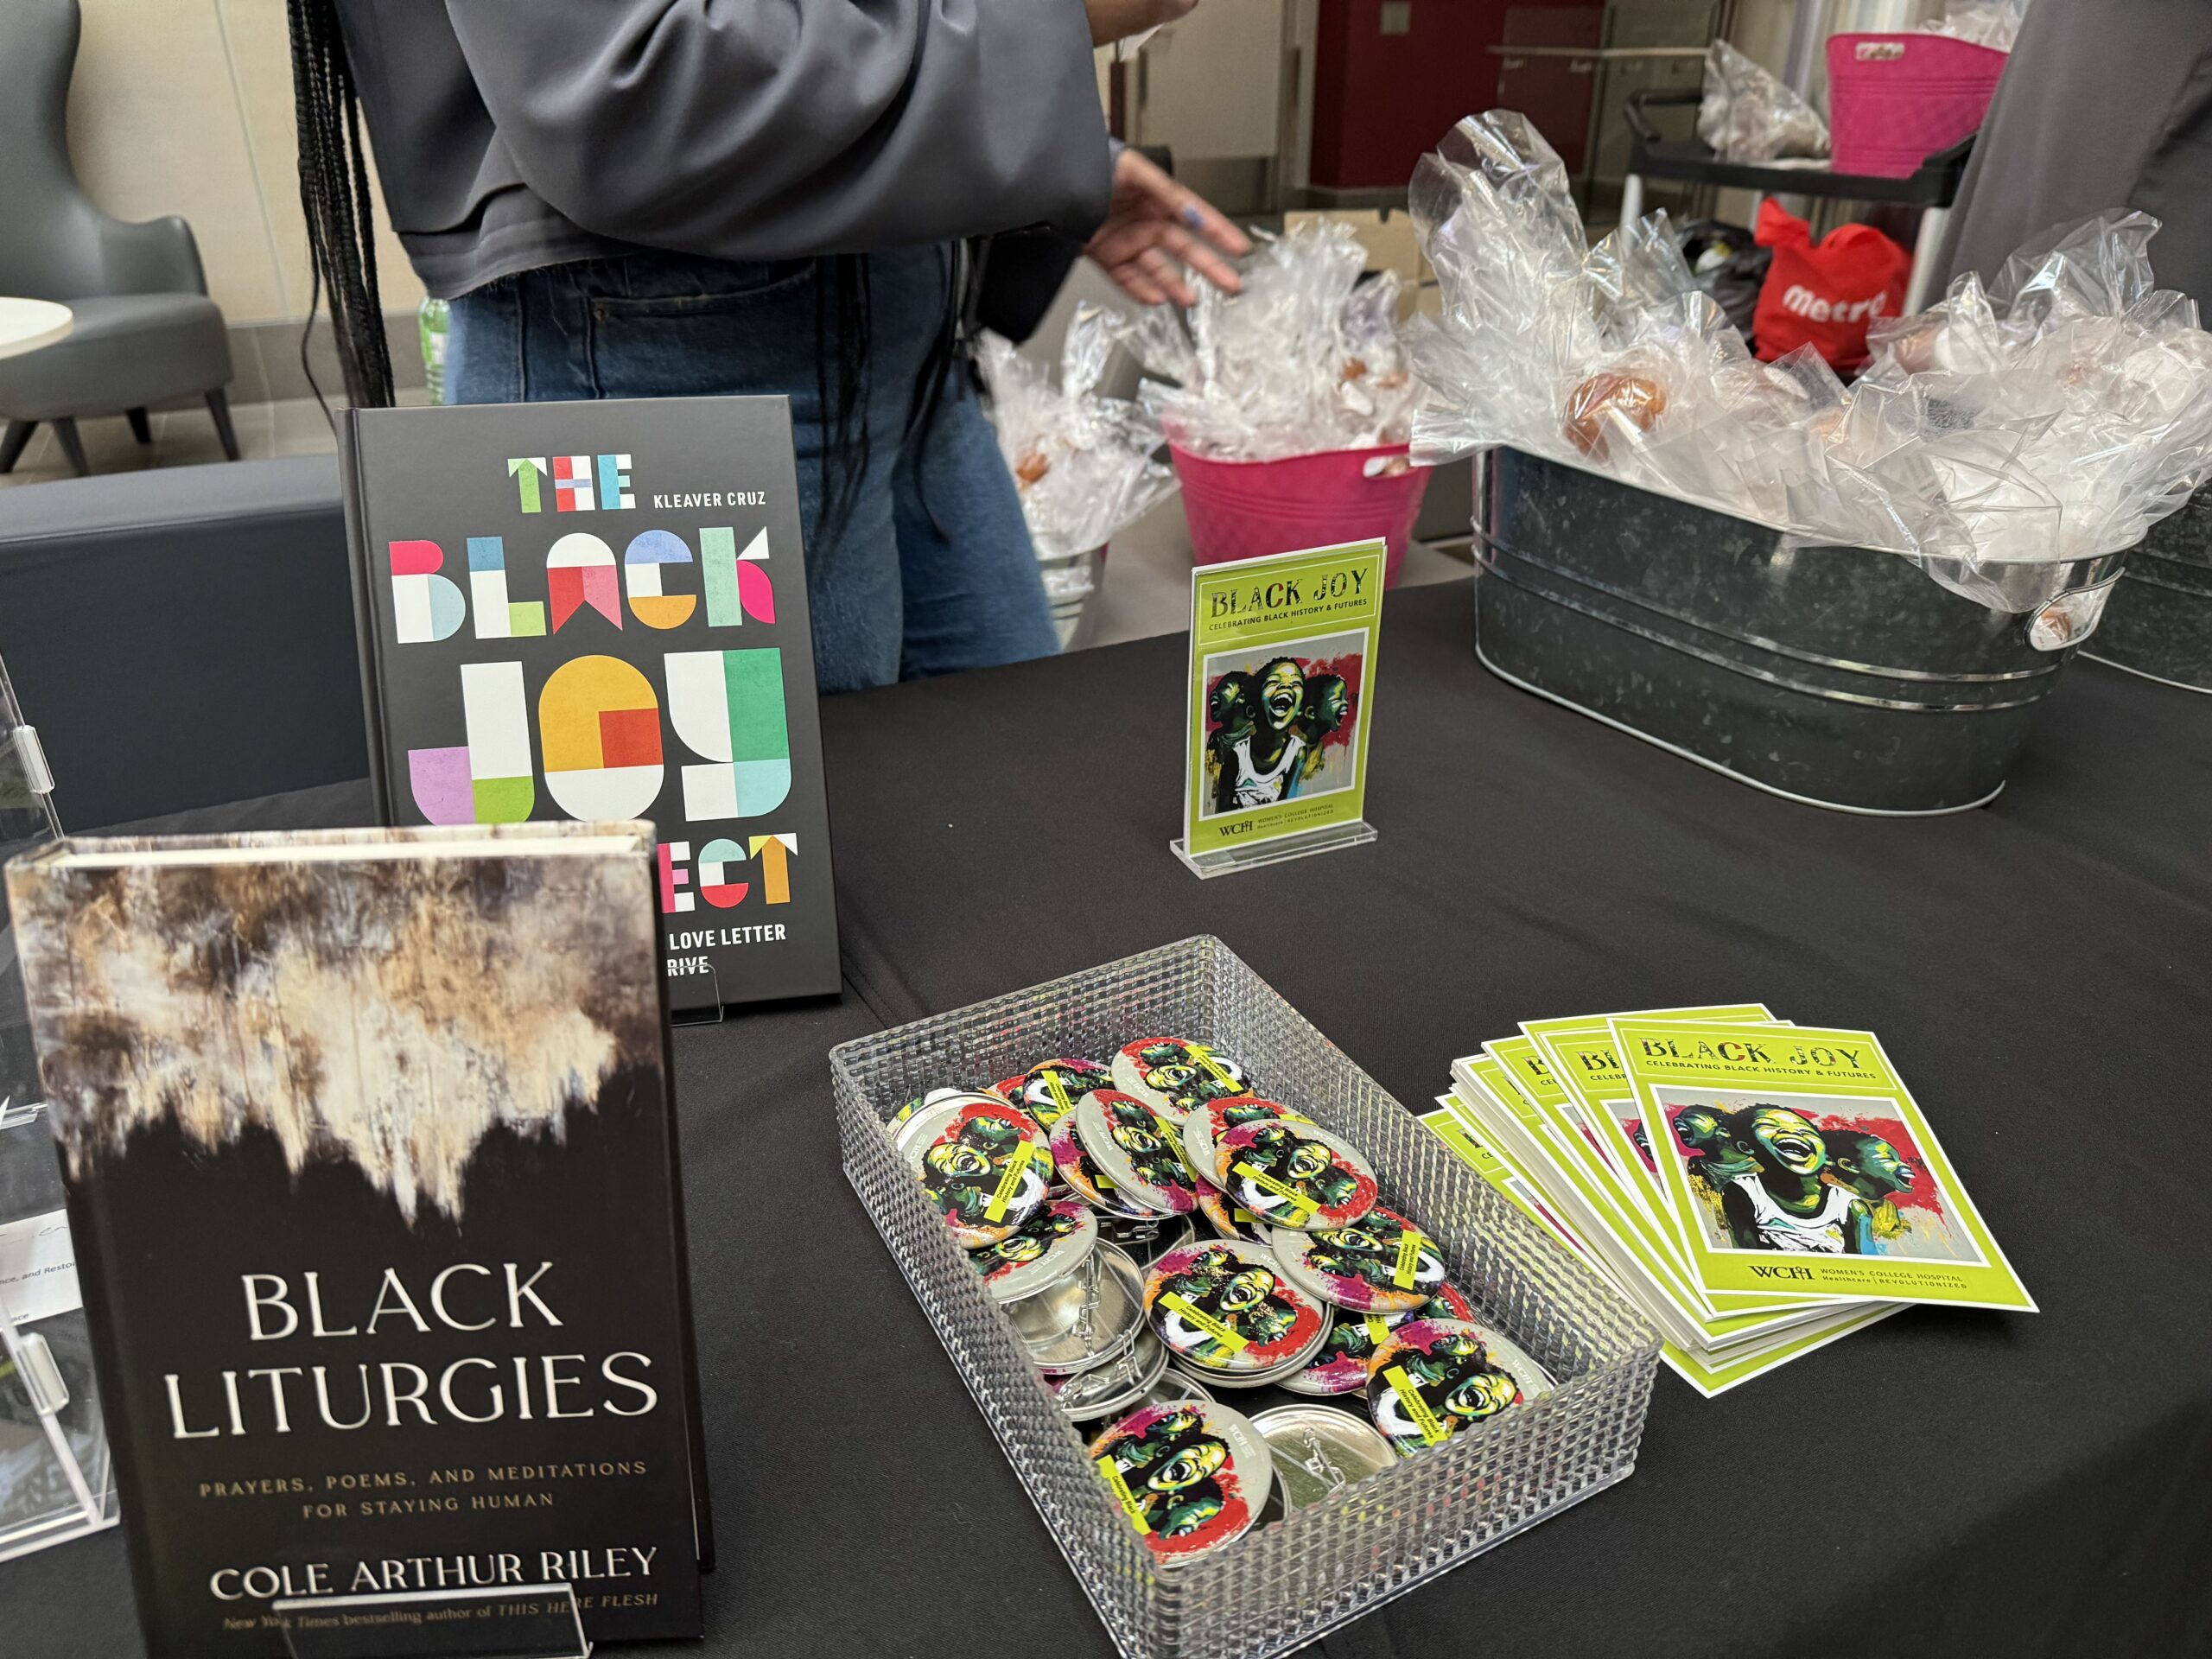 Photo of Black History Futures Month swag including 'Black Joy' buttons, 'Black Liturgies' book and 'The Black Joy Project' book